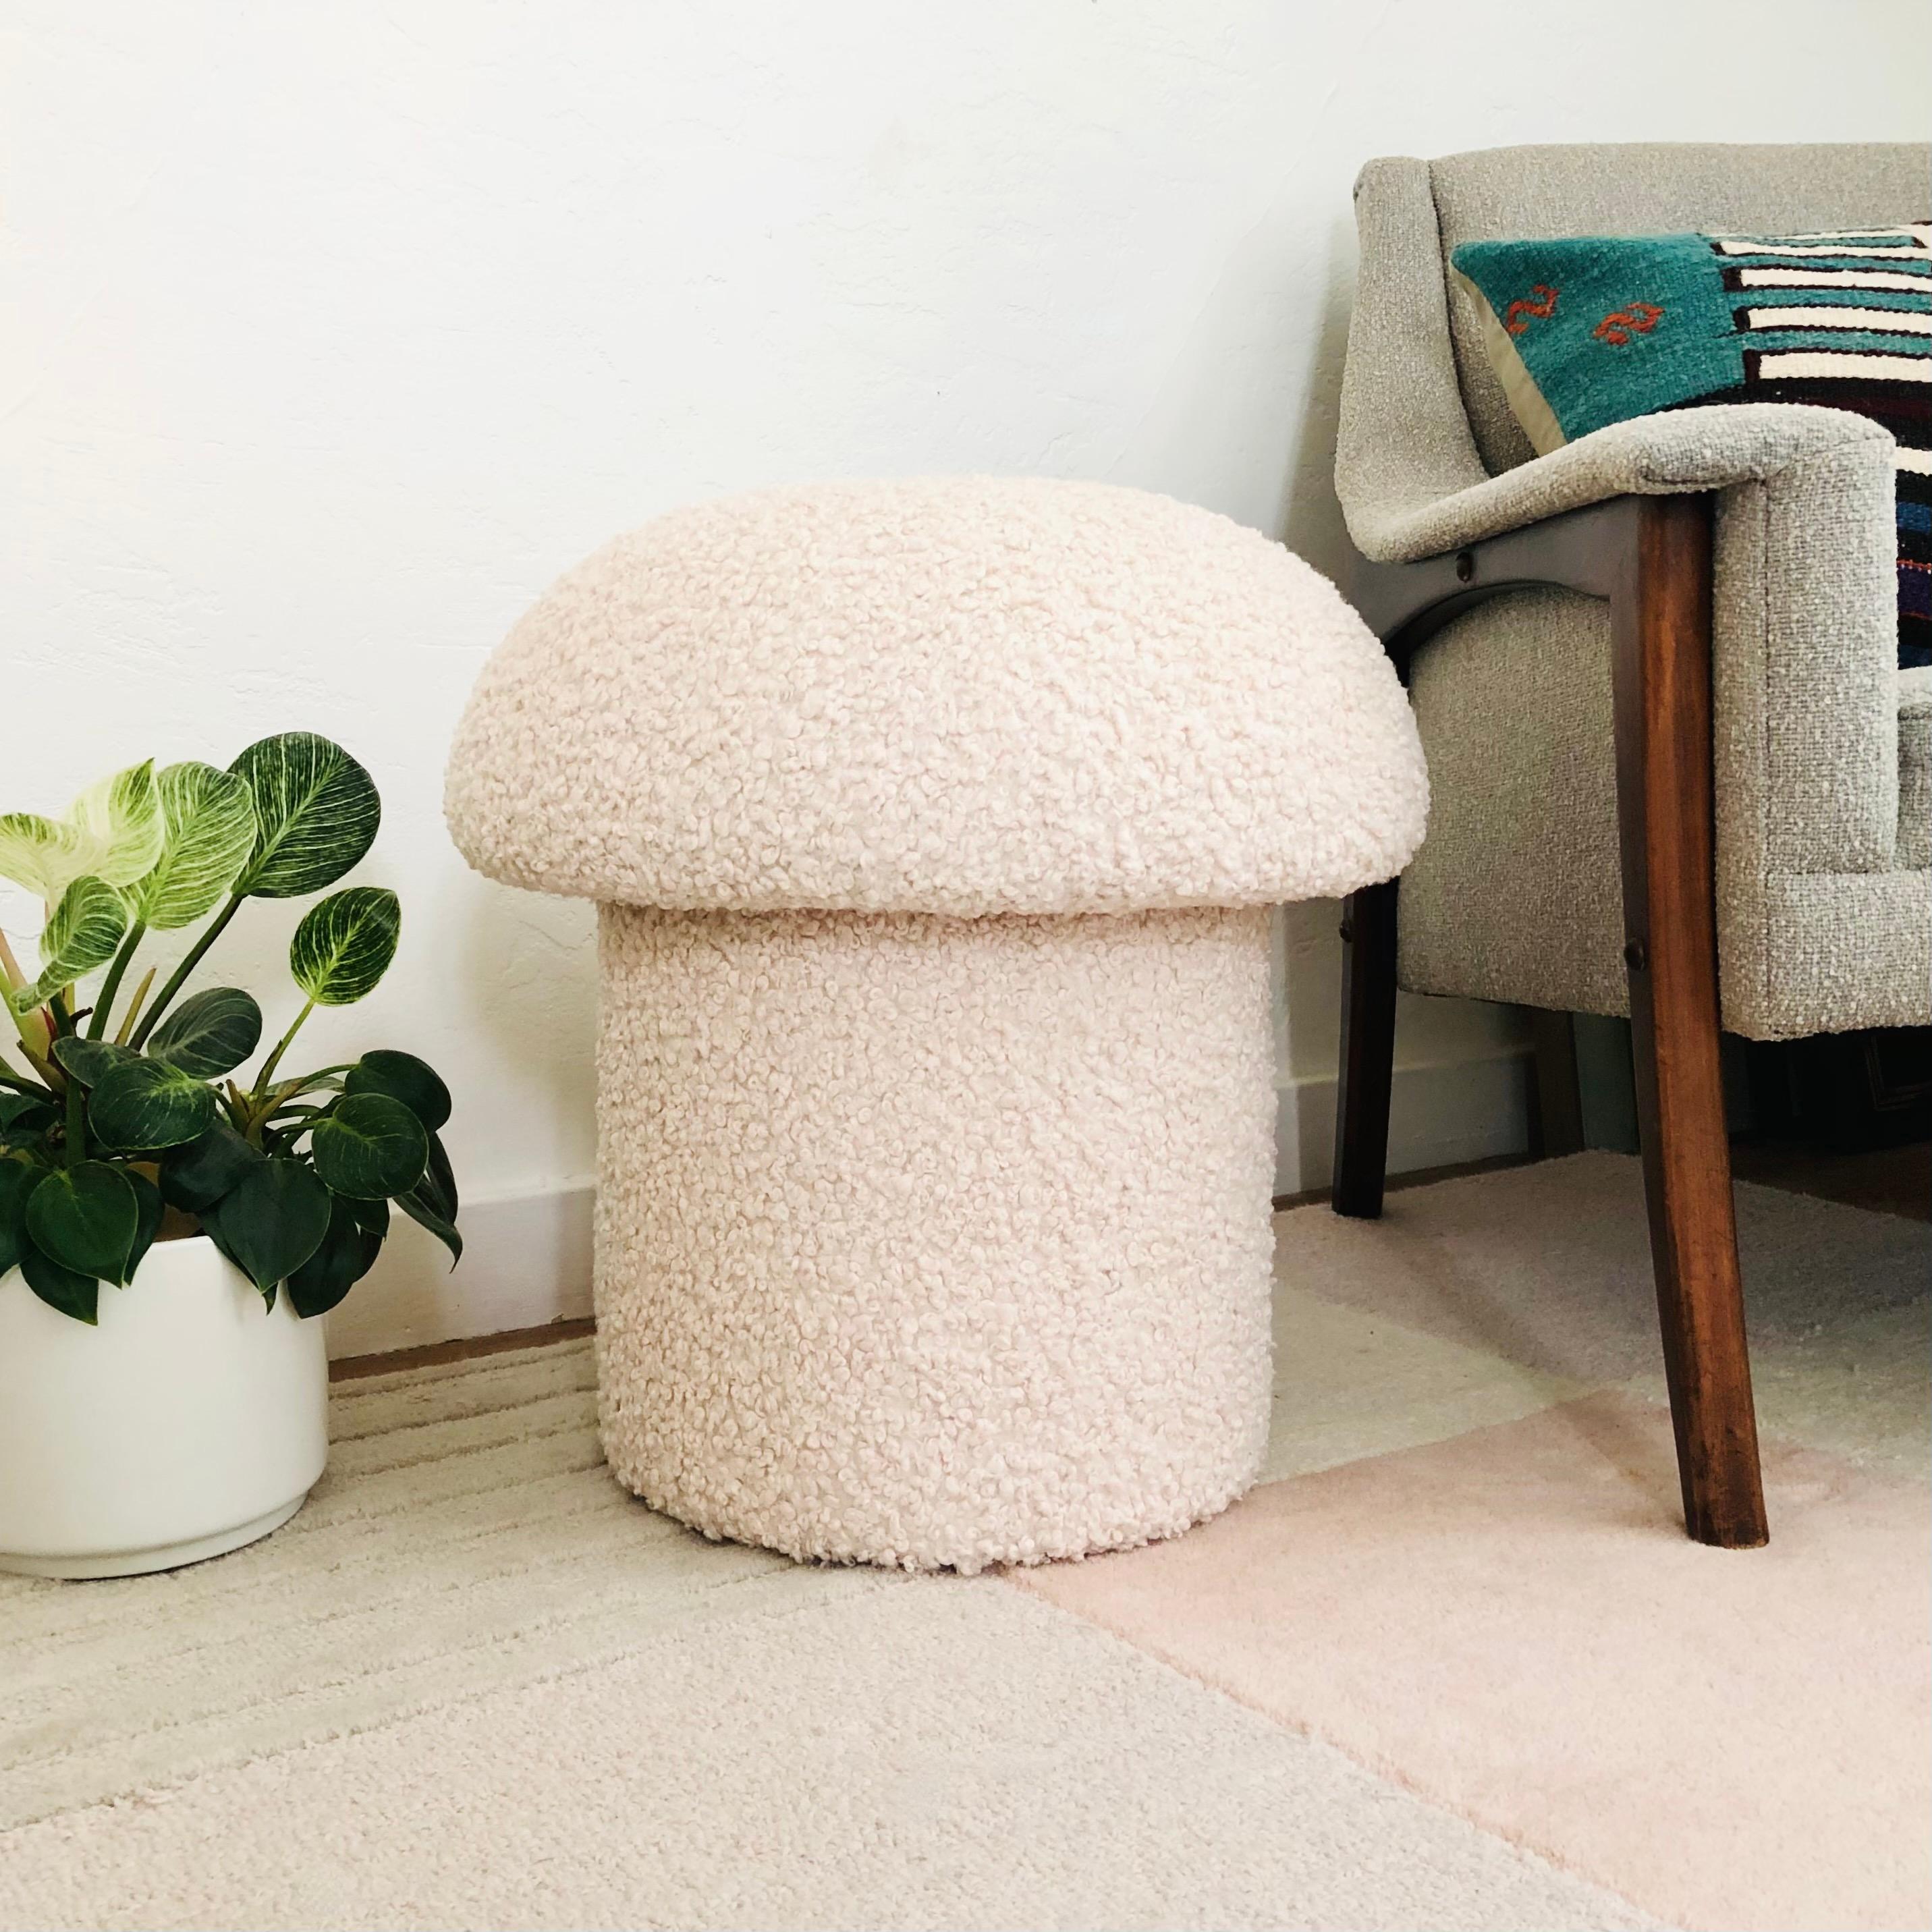 A handmade mushroom shaped stool, upholstered in a white colored curly boucle fabric. Perfect for using as a footstool or extra occasional seating. A comfortable cushioned seat and sculptural accent piece.
Mushroom ottomans are made to order,